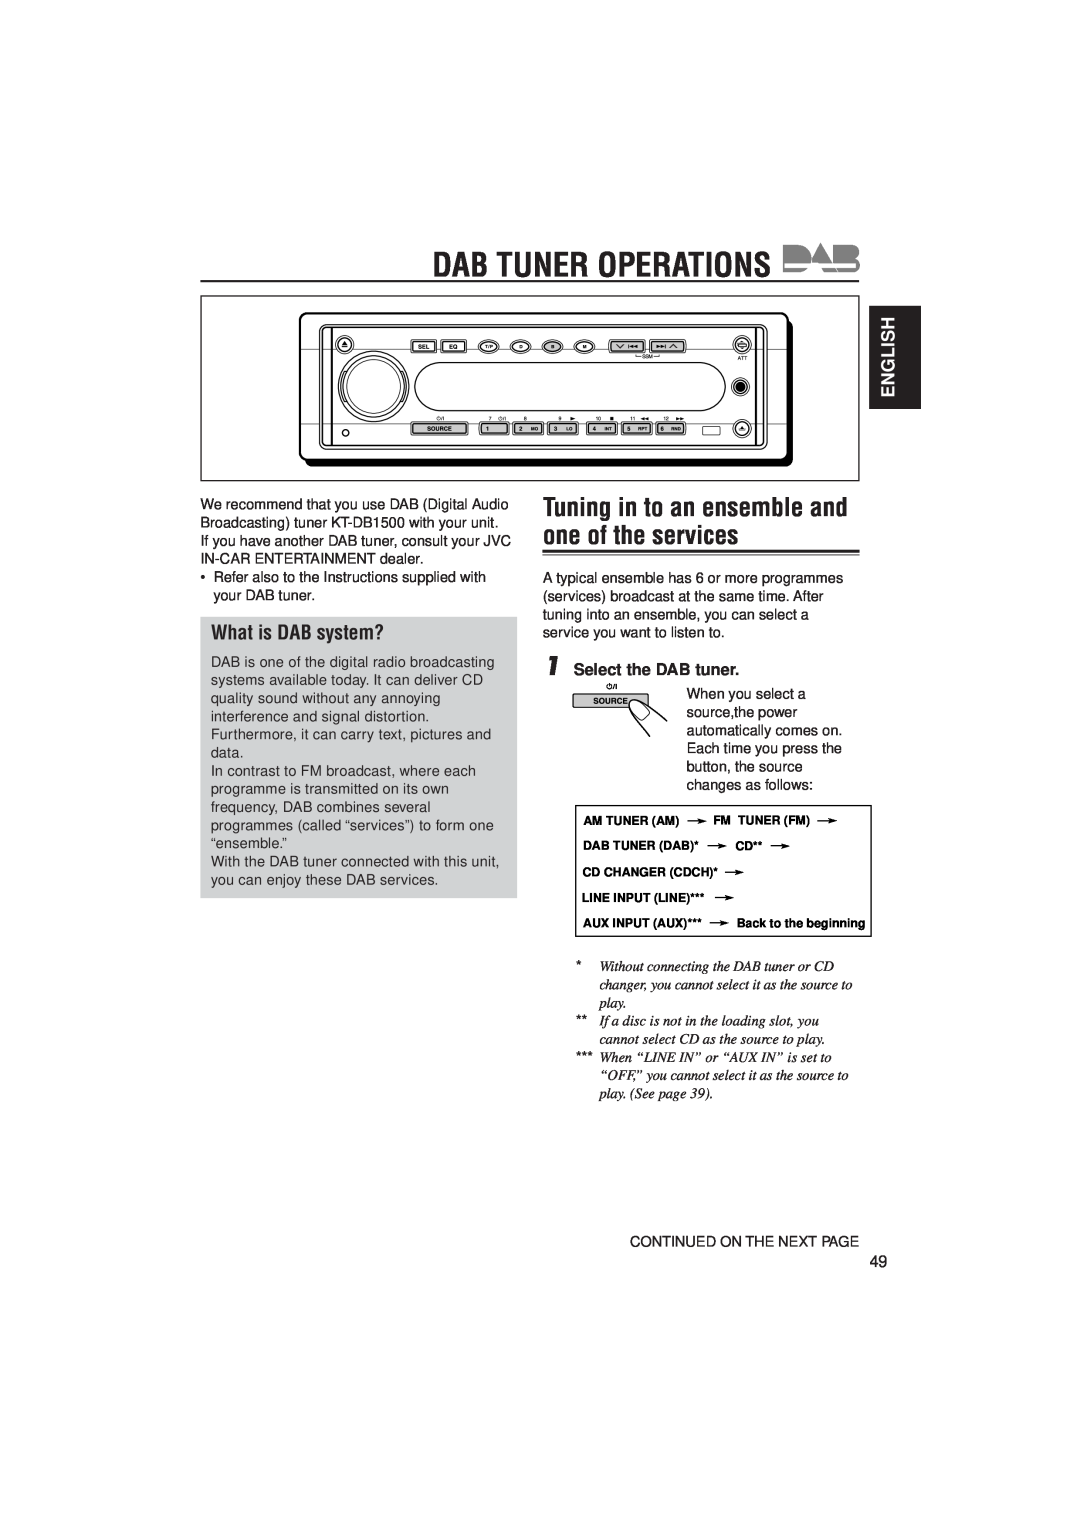 JVC KD-SH707R manual Tuning in to an ensemble and one of the services, What is DAB system?, Dab Tuner Operations, English 